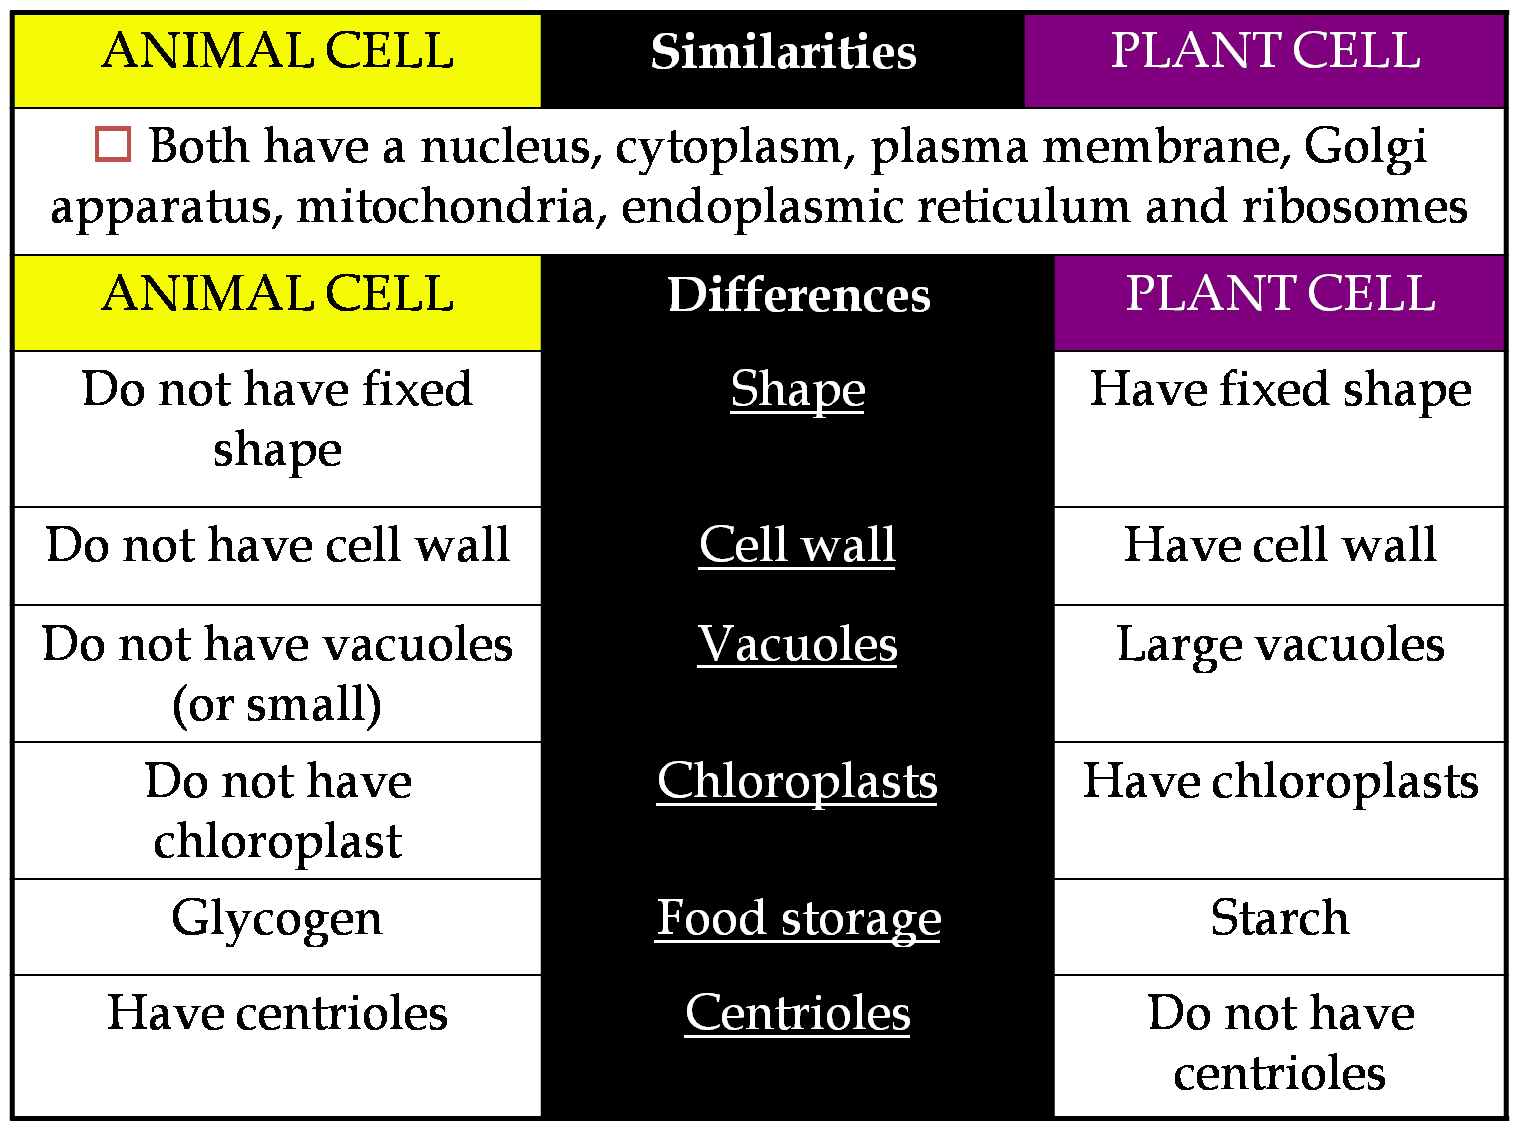 BIOLOGY IS FUN: COMPARISON BETWEEN ANIMAL CELL AND PLANT CELL